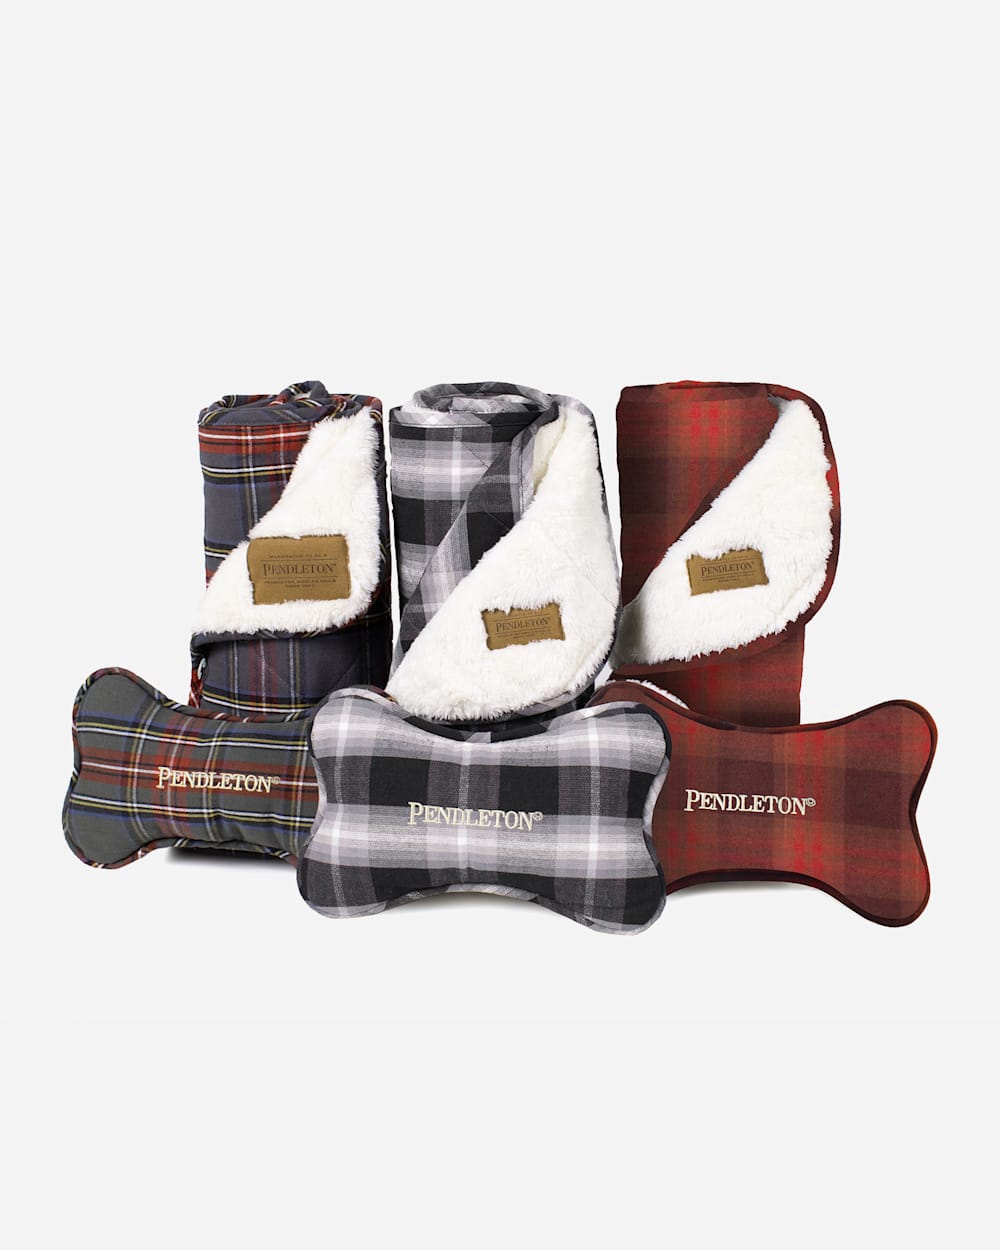 ALTERNATE VIEW OF CLASSIC PLAID THROW AND TOY IN RED OMBRE PLAID image number 2